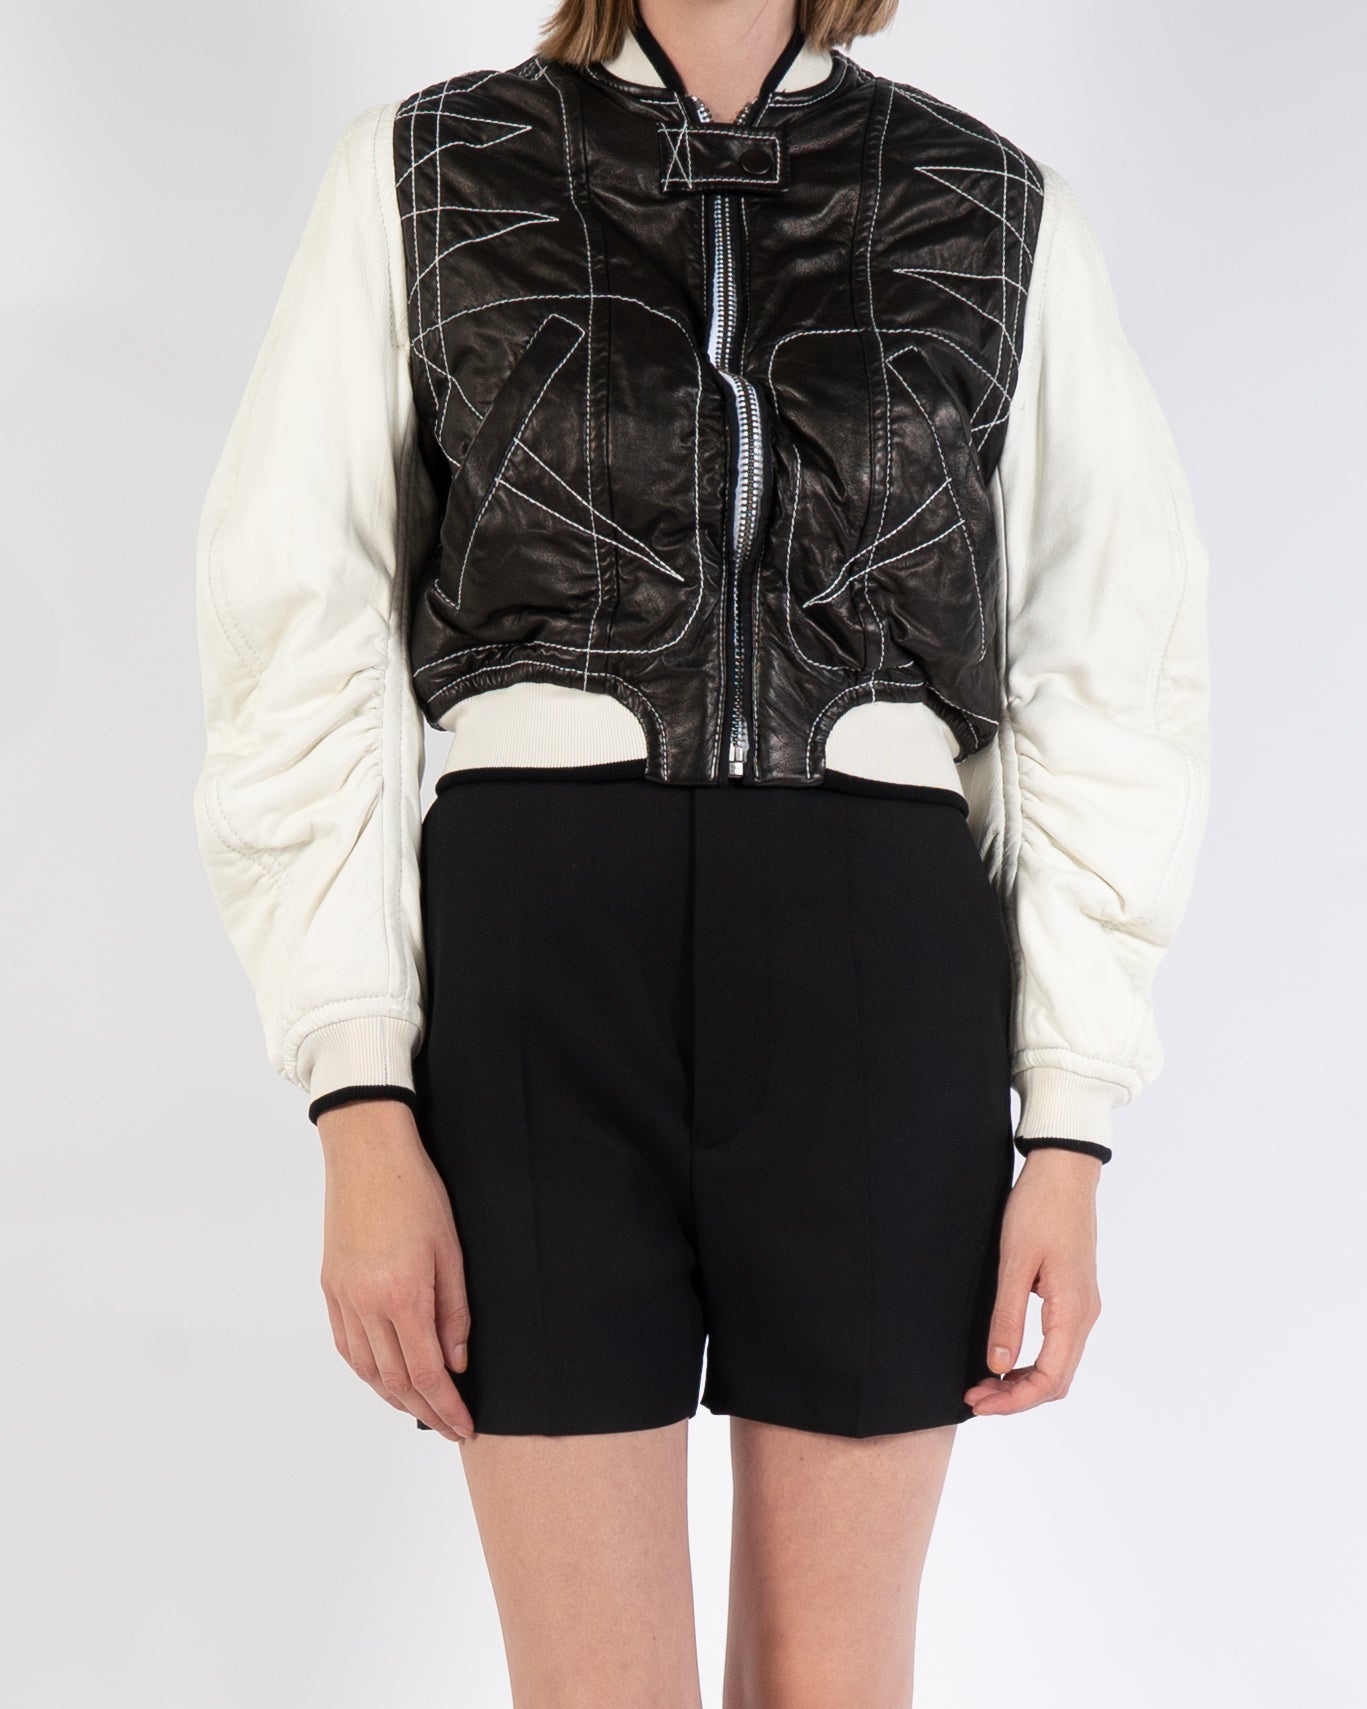 SS18 Bicolor Leather Bomber Jacket